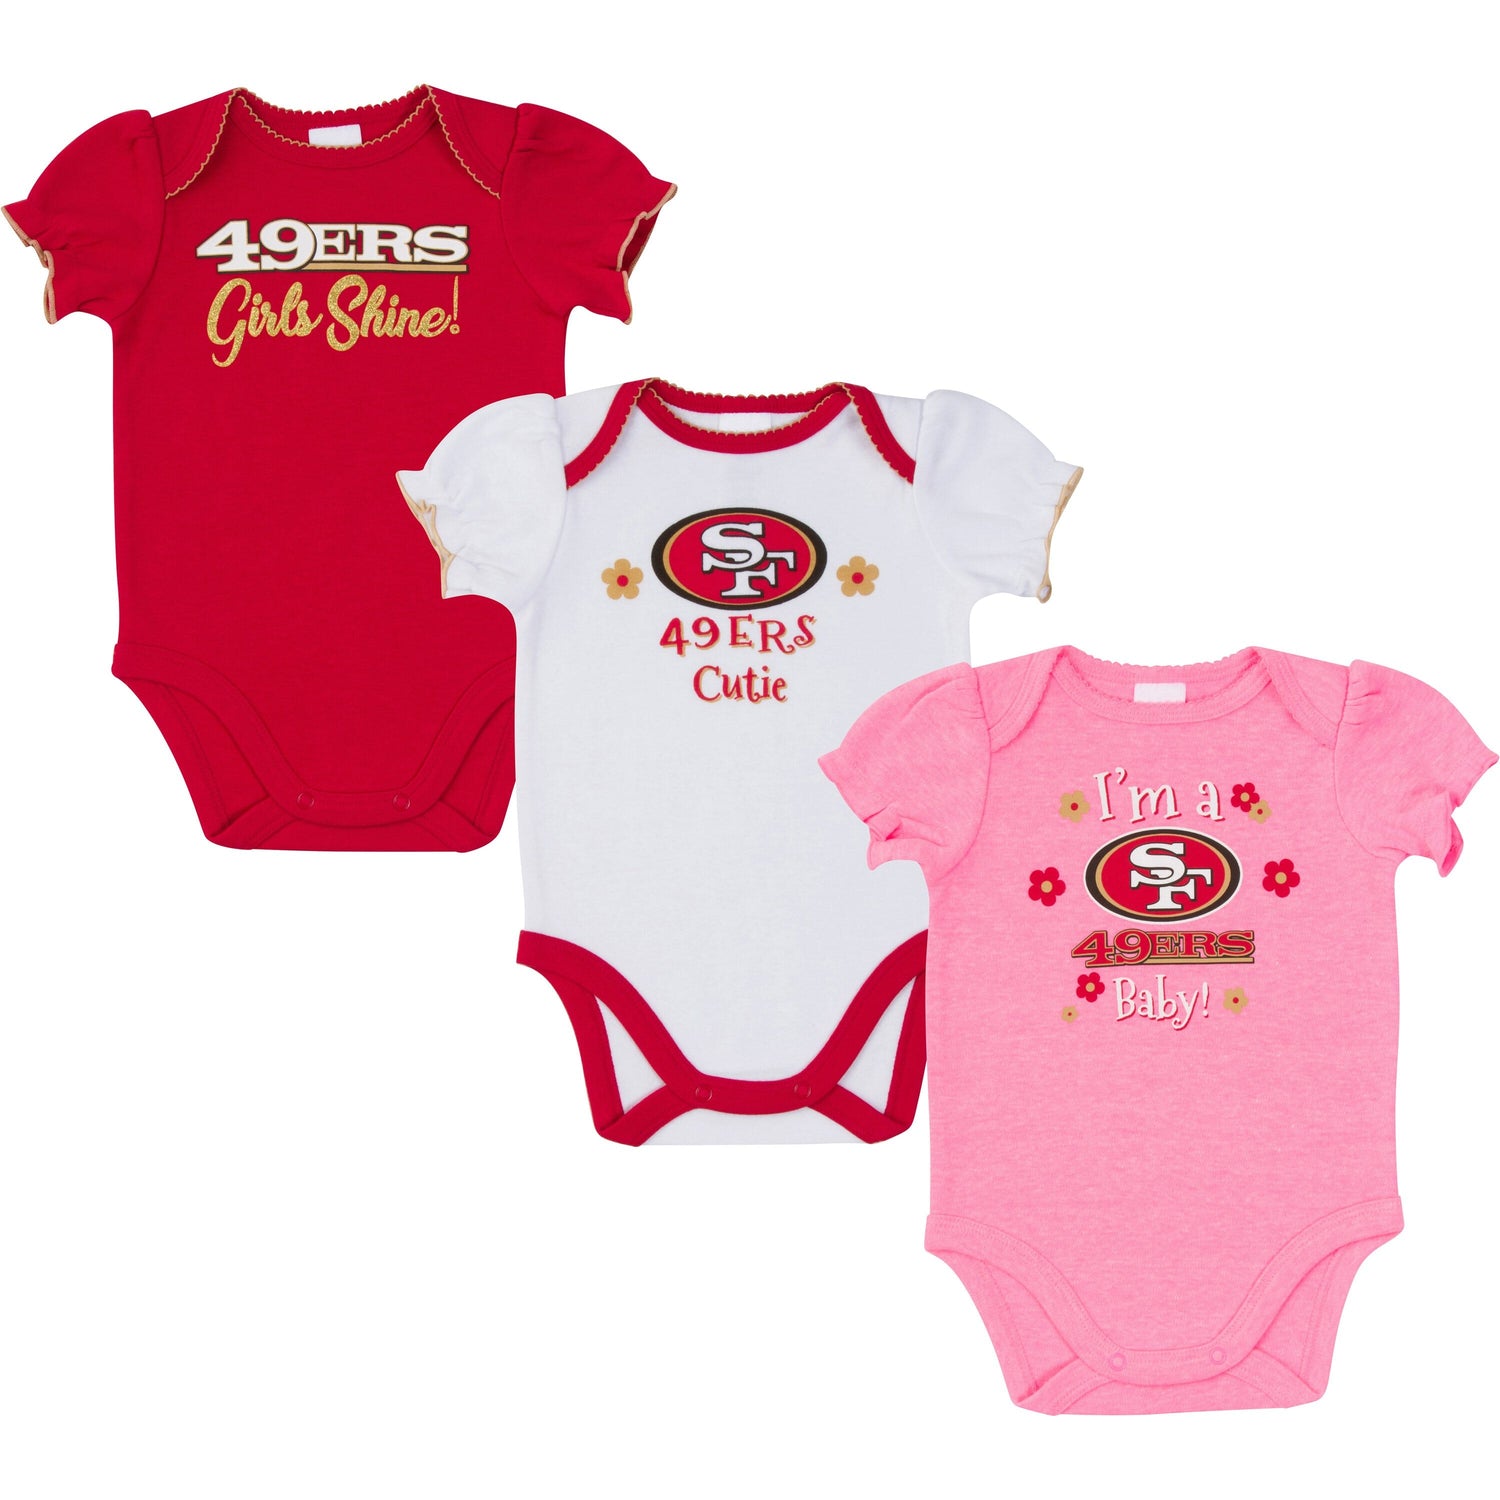 baby niners jersey